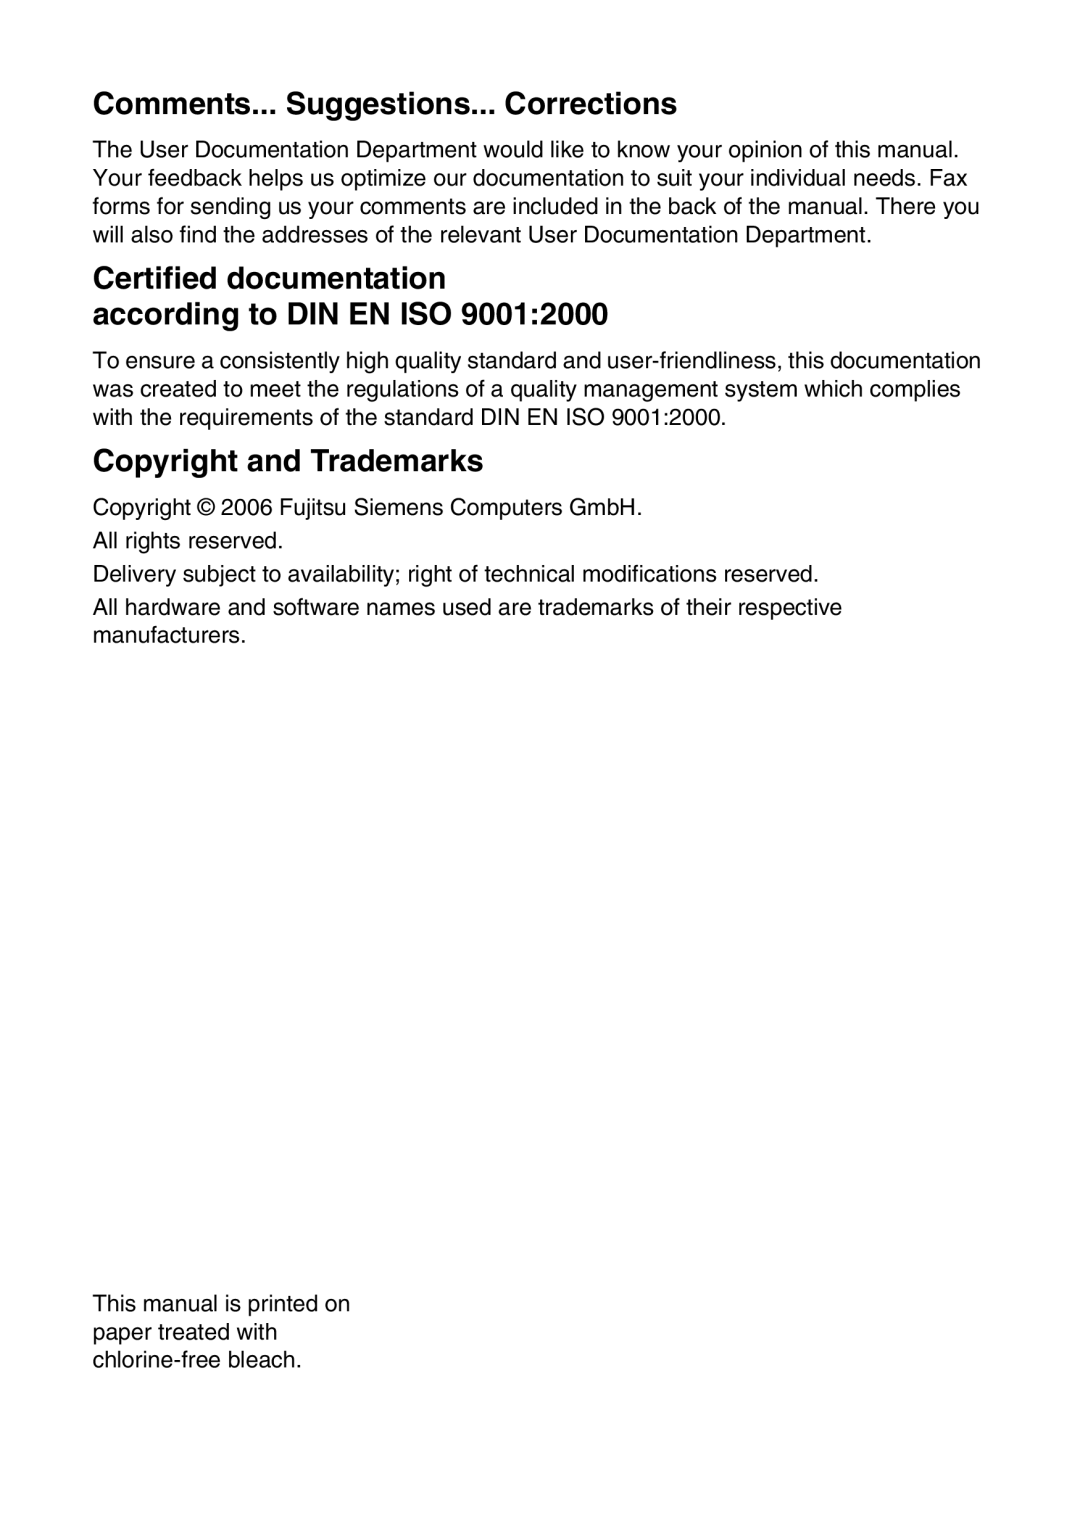 Siemens KVM s2-0411 manual Comments... Suggestions... Corrections, Certified documentation according to DIN EN ISO 